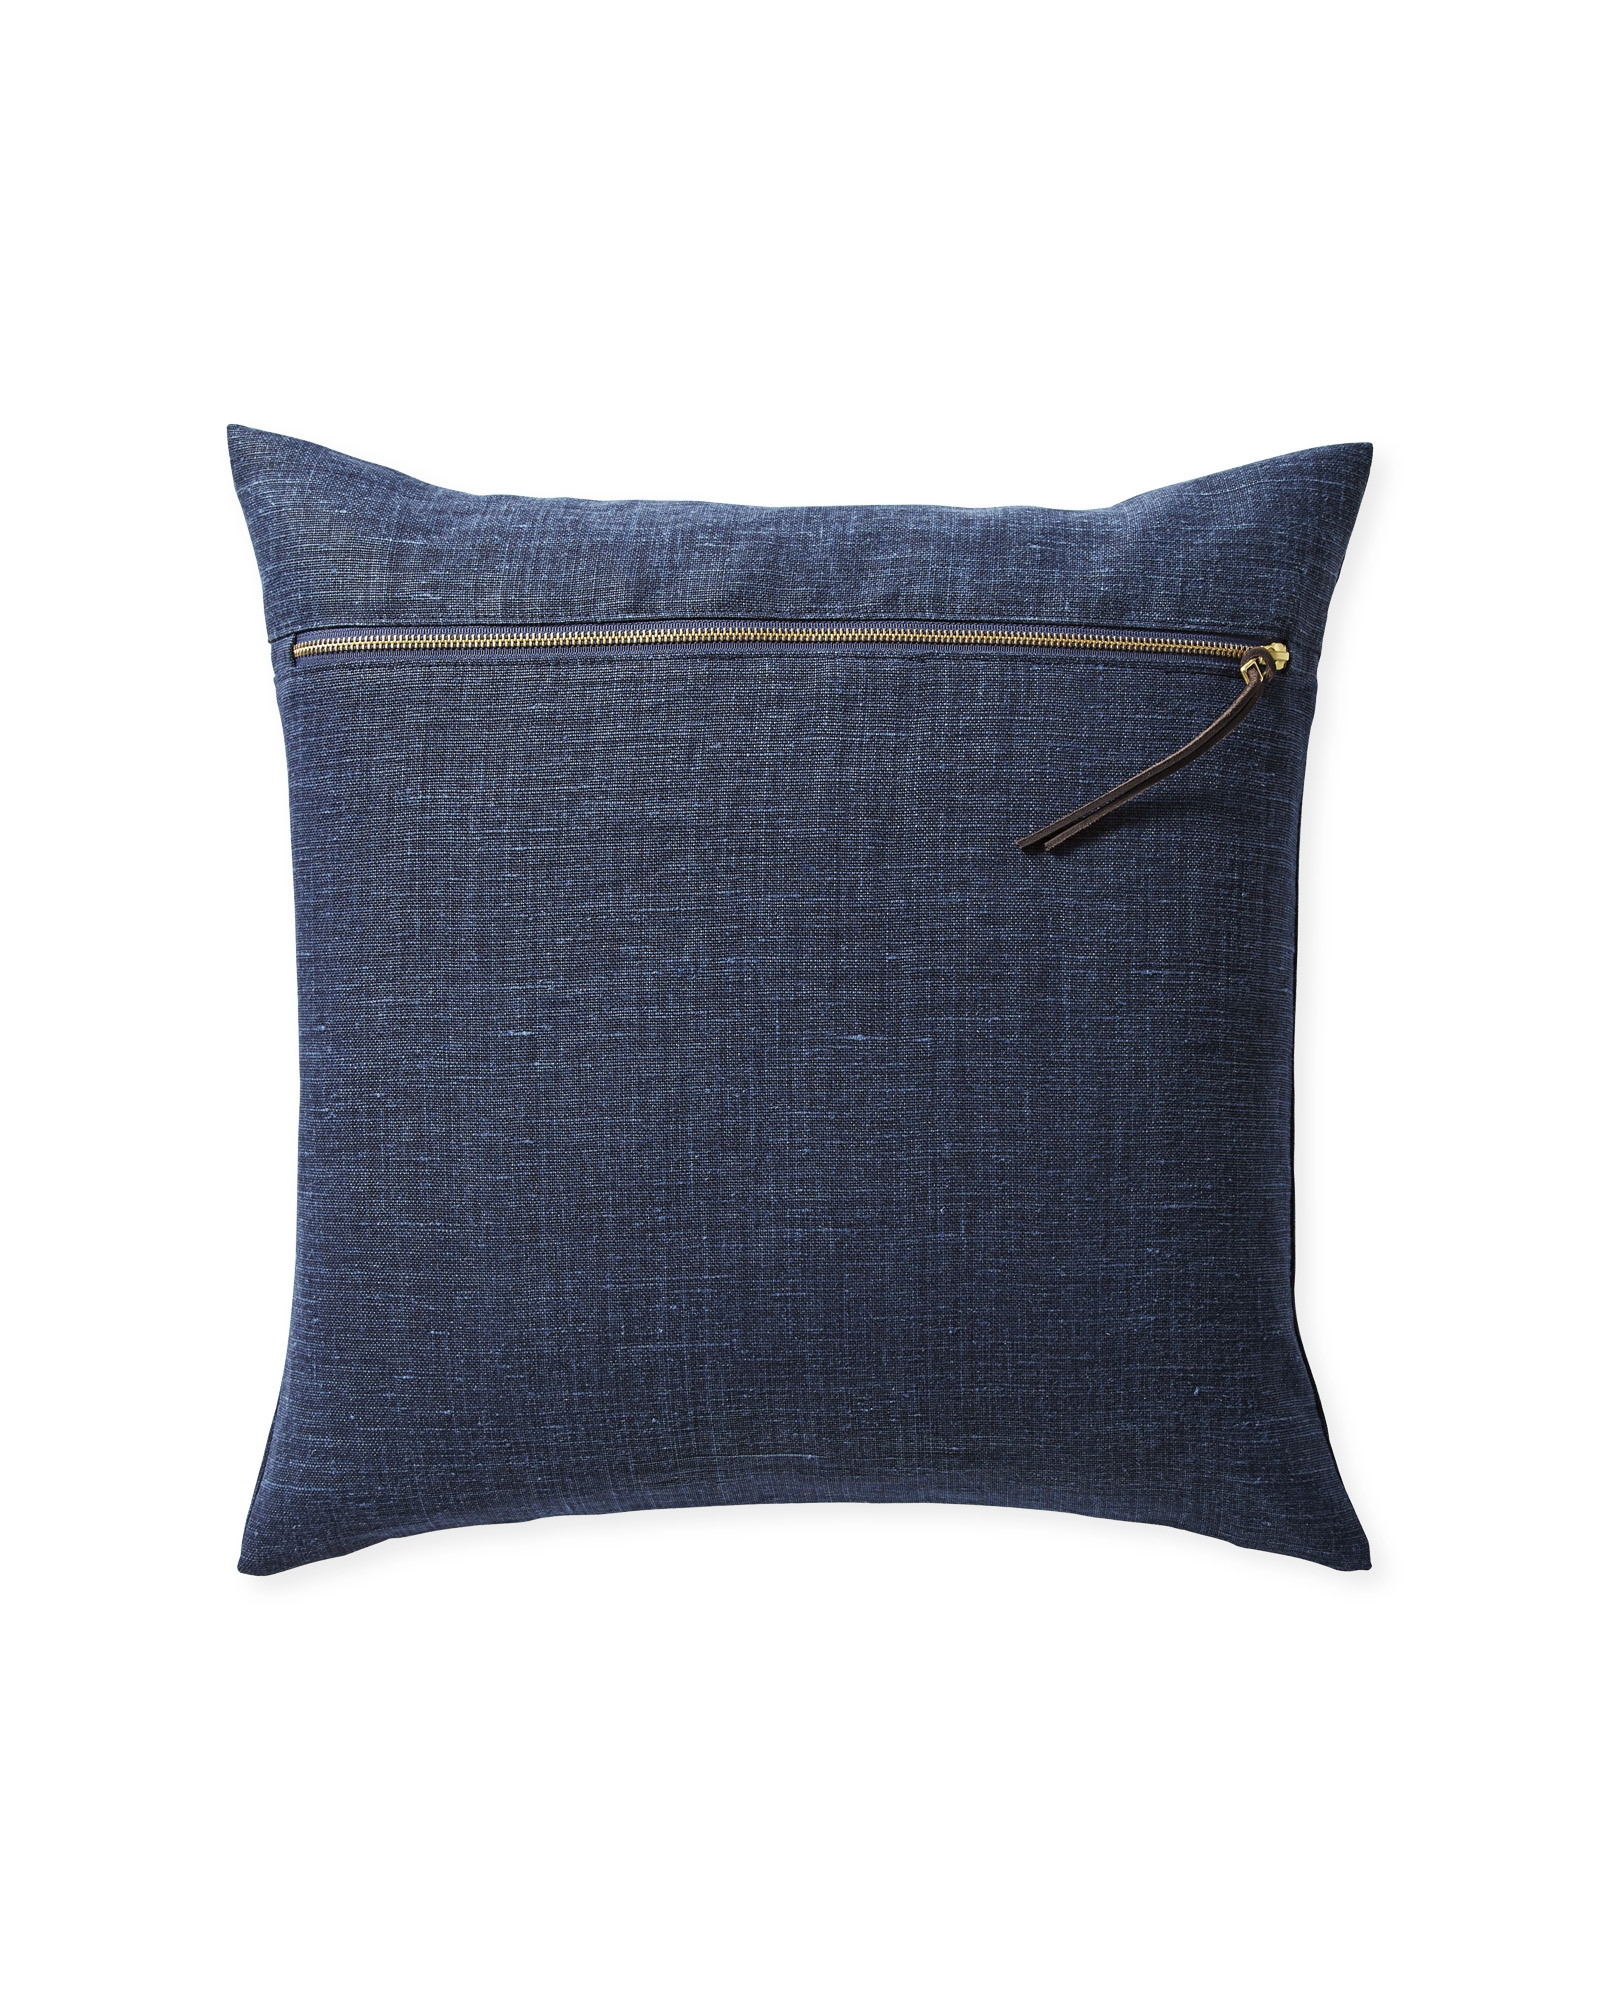 Kentfield 20" SQ Pillow Cover - Navy - Insert sold separately - Image 1